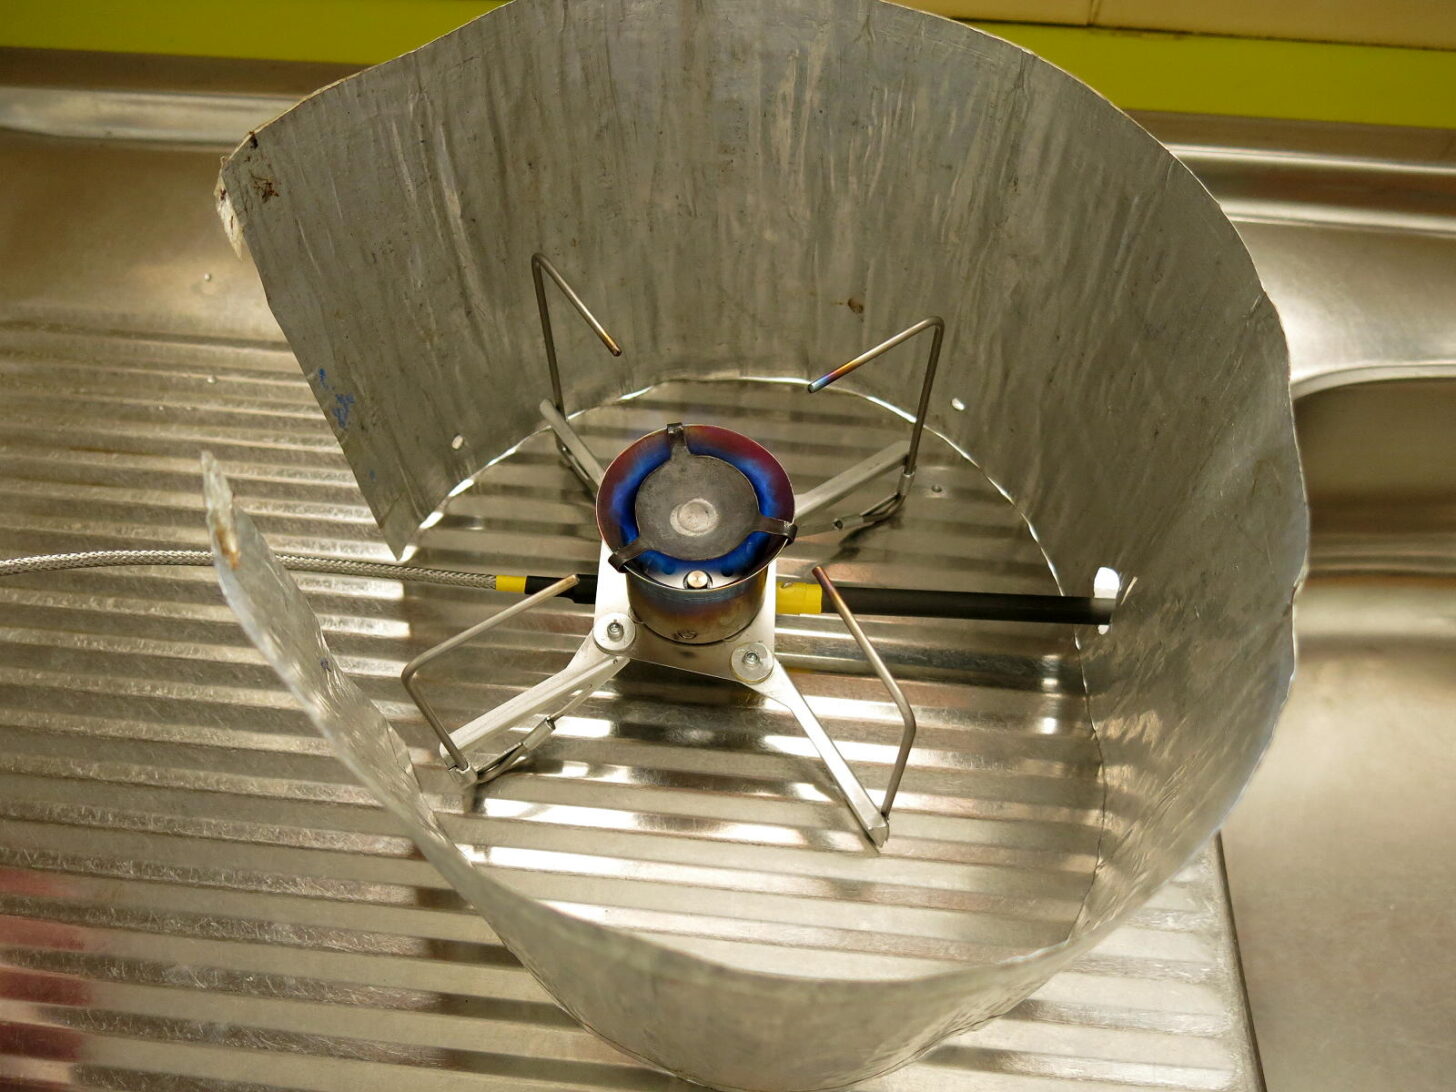 a stove inside a wind screen on a workbench